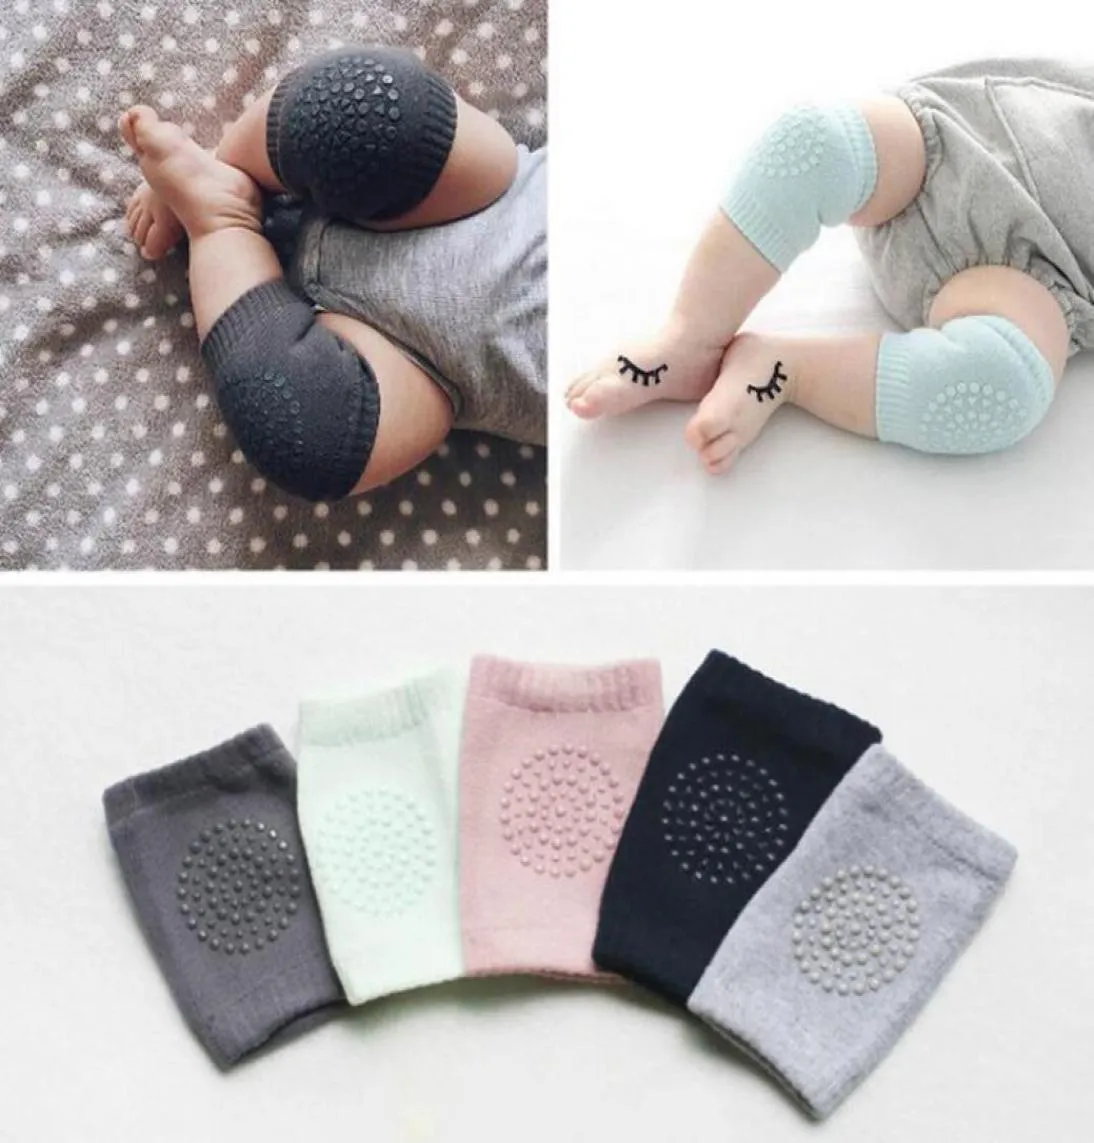 Soft Mesh Baby Leg Warmers Toddler Kids Kneepad Protector Nonslip Distening Safety Flaging Well Knee Pads Gaiters for Child4873962